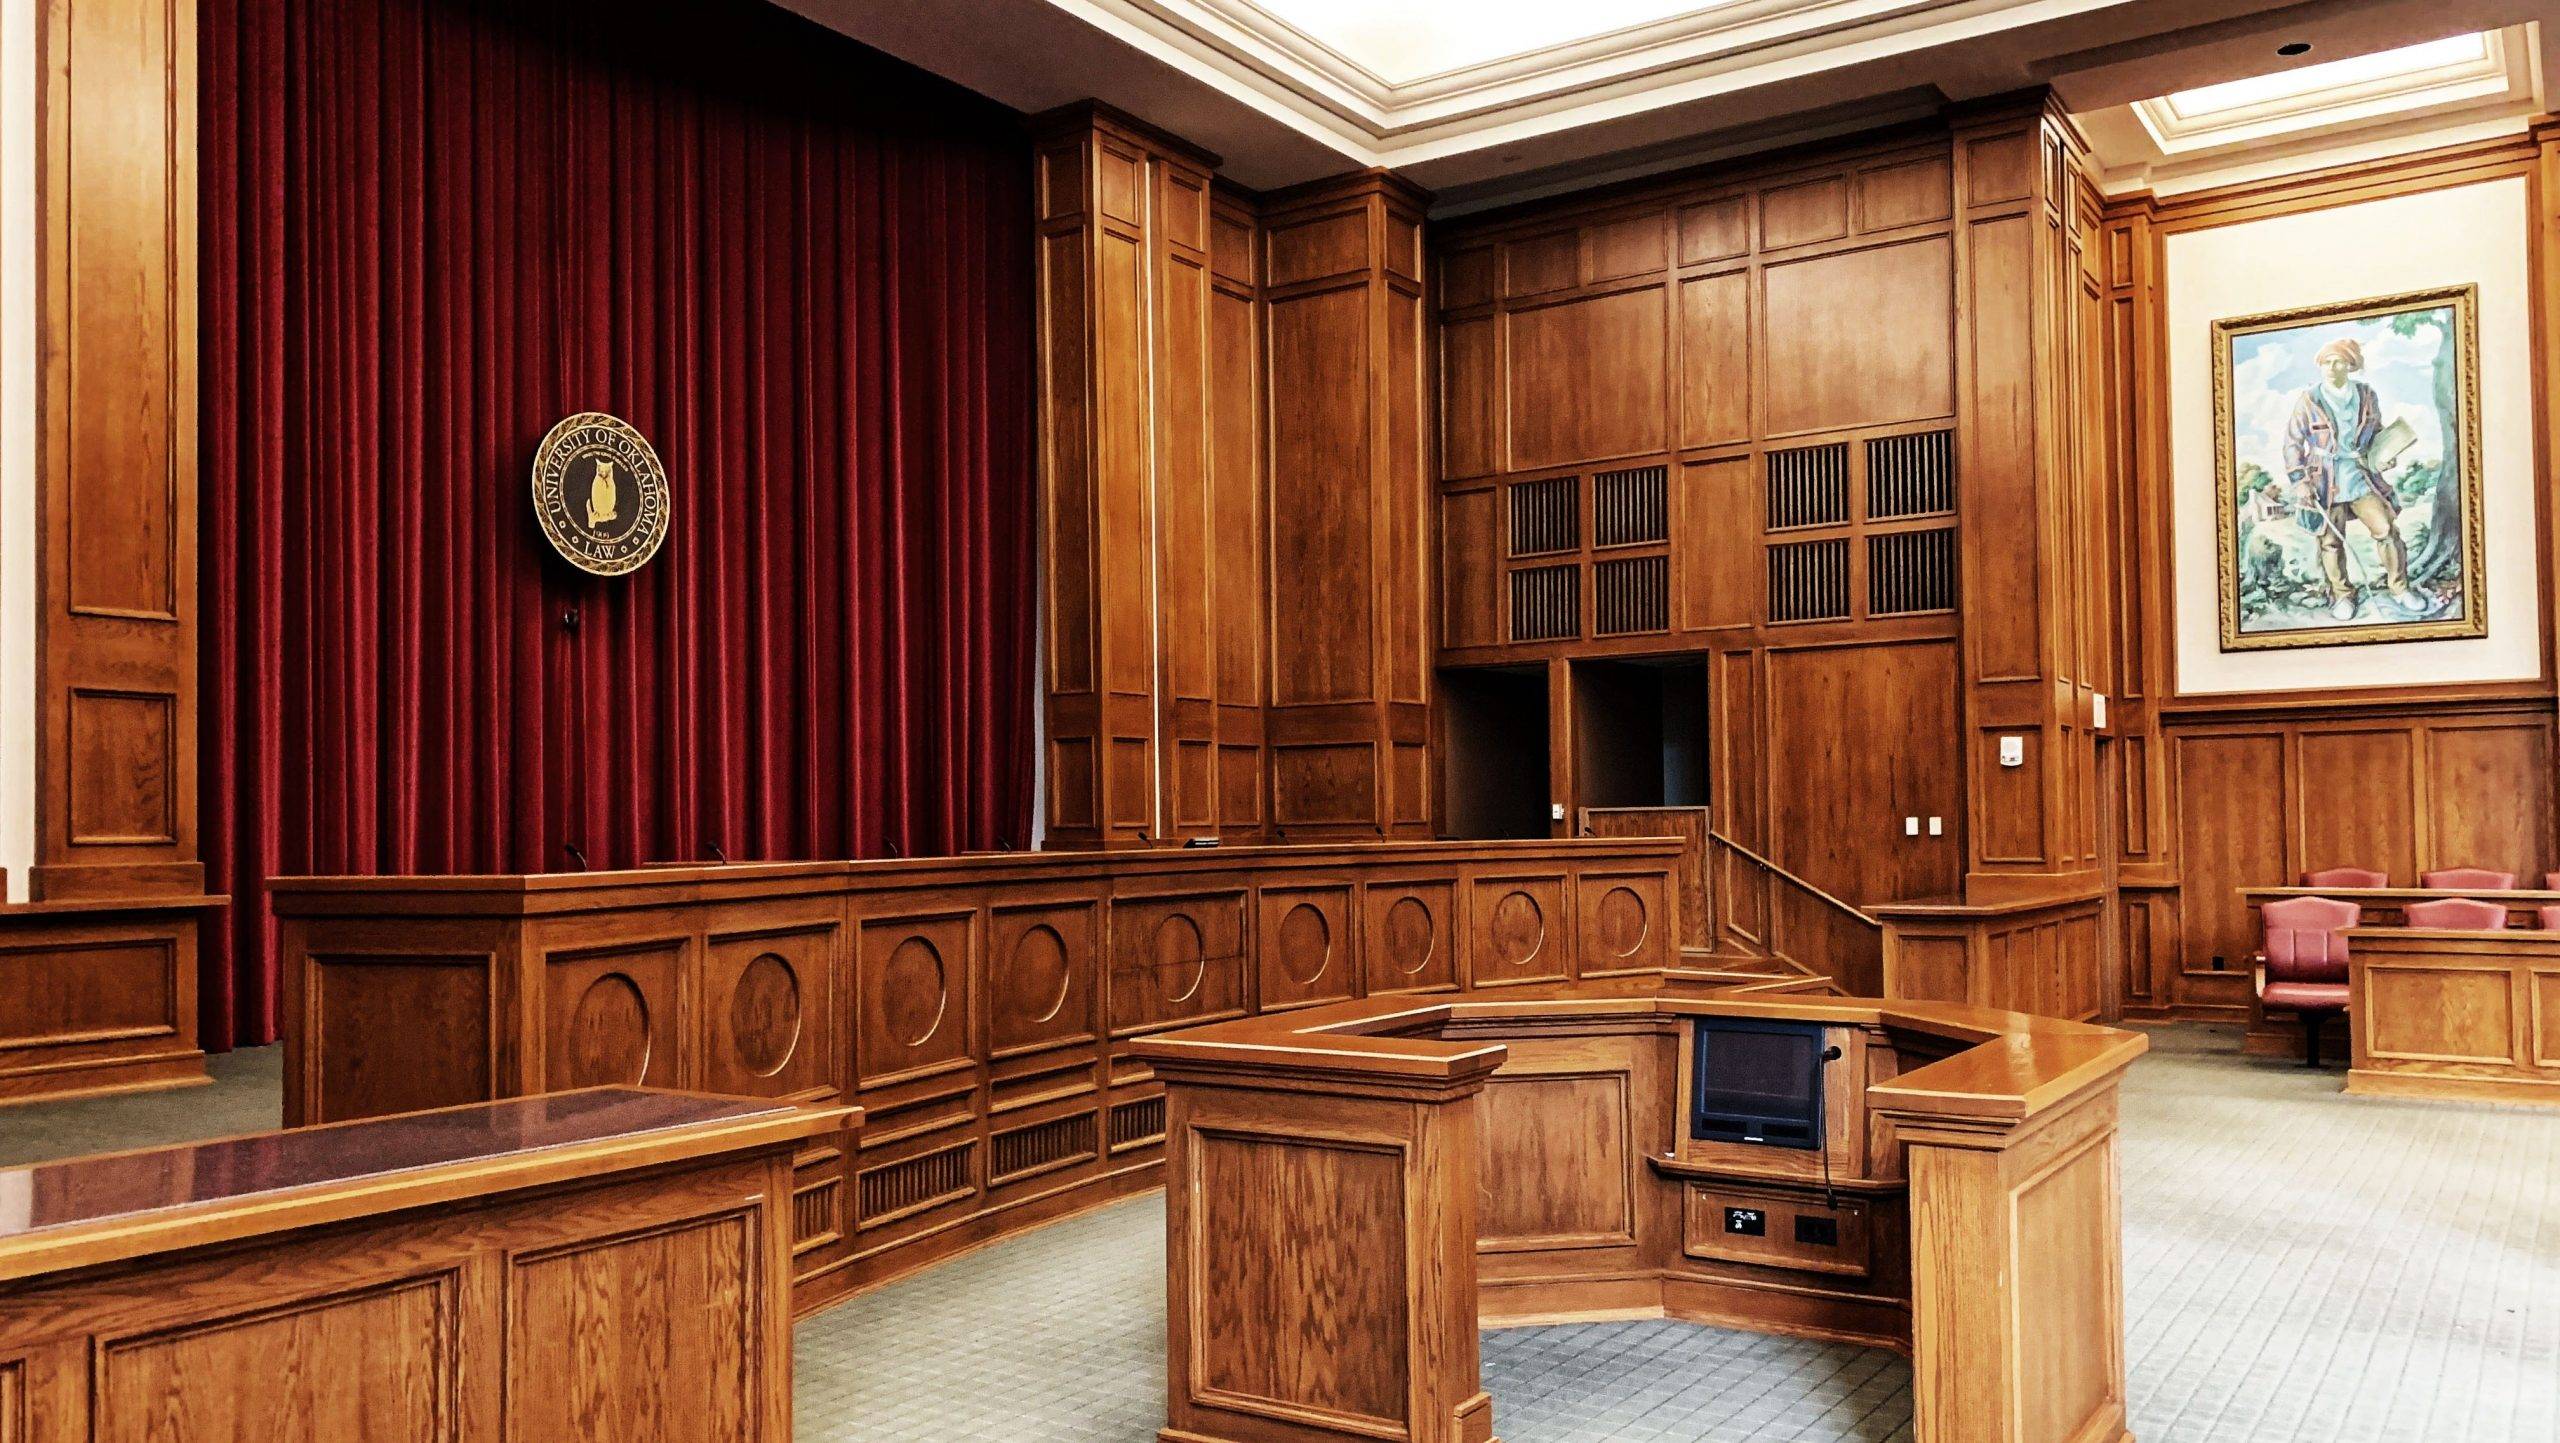 Photo of a courtroom before jurors arrive for jury duty.